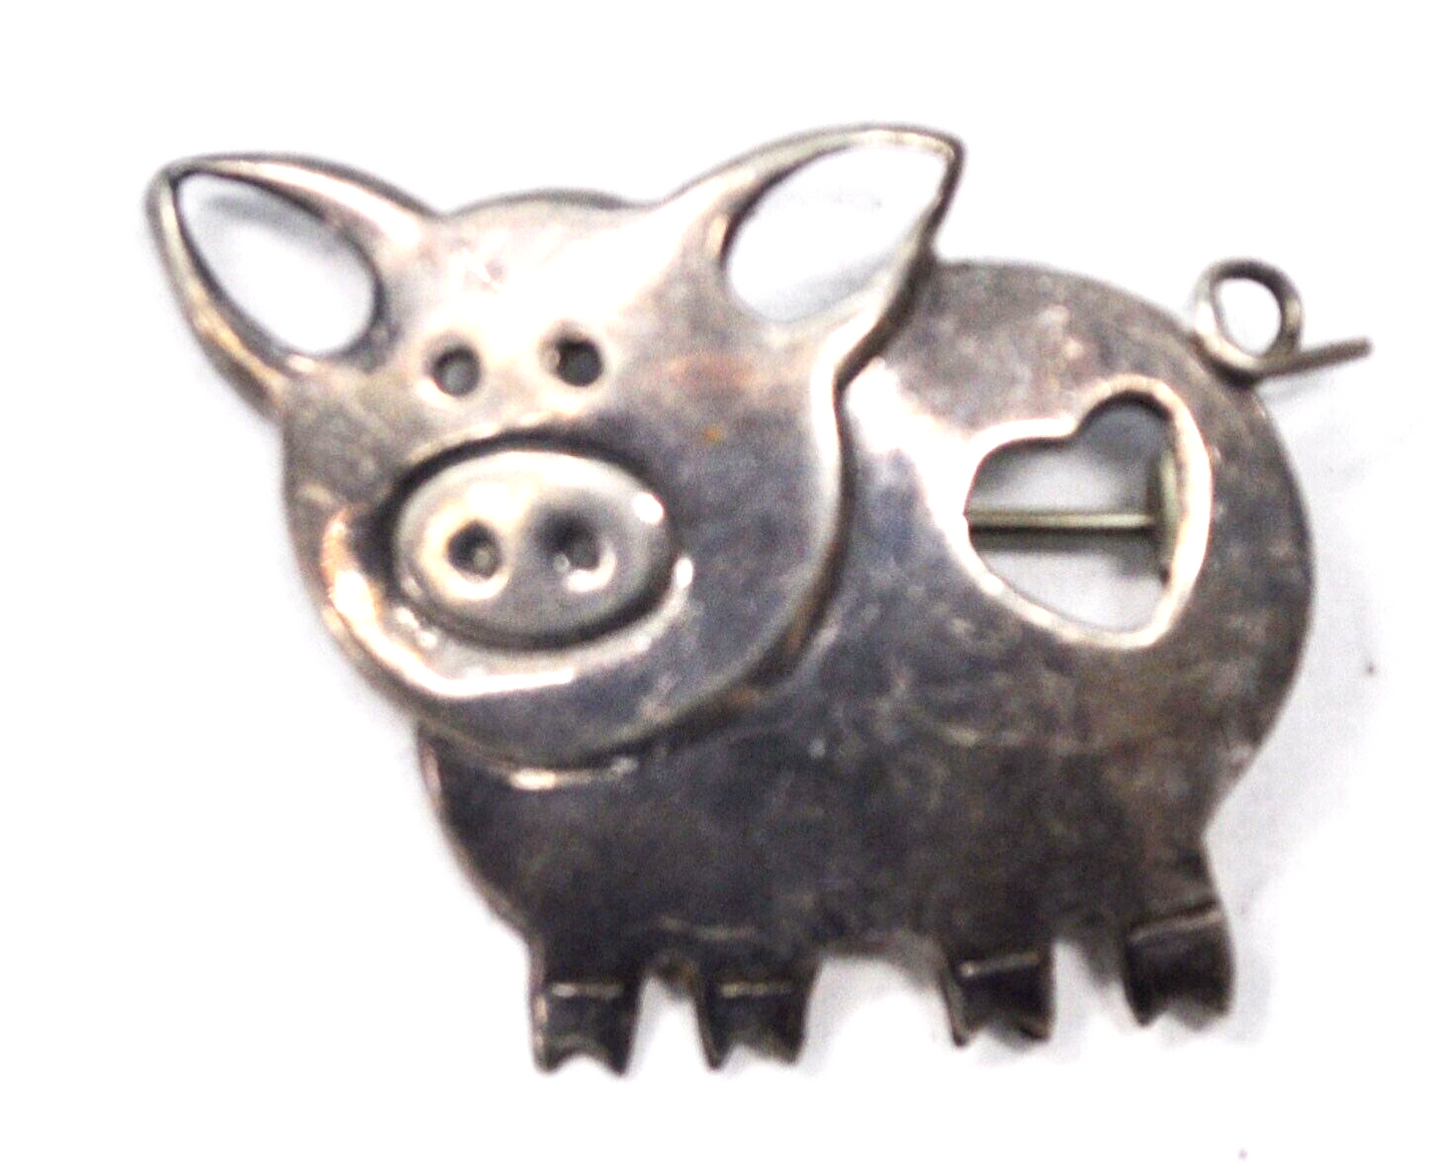 Sterling Silver Mexico SU Pig Toad Brooch Pin 36mm x 27mm